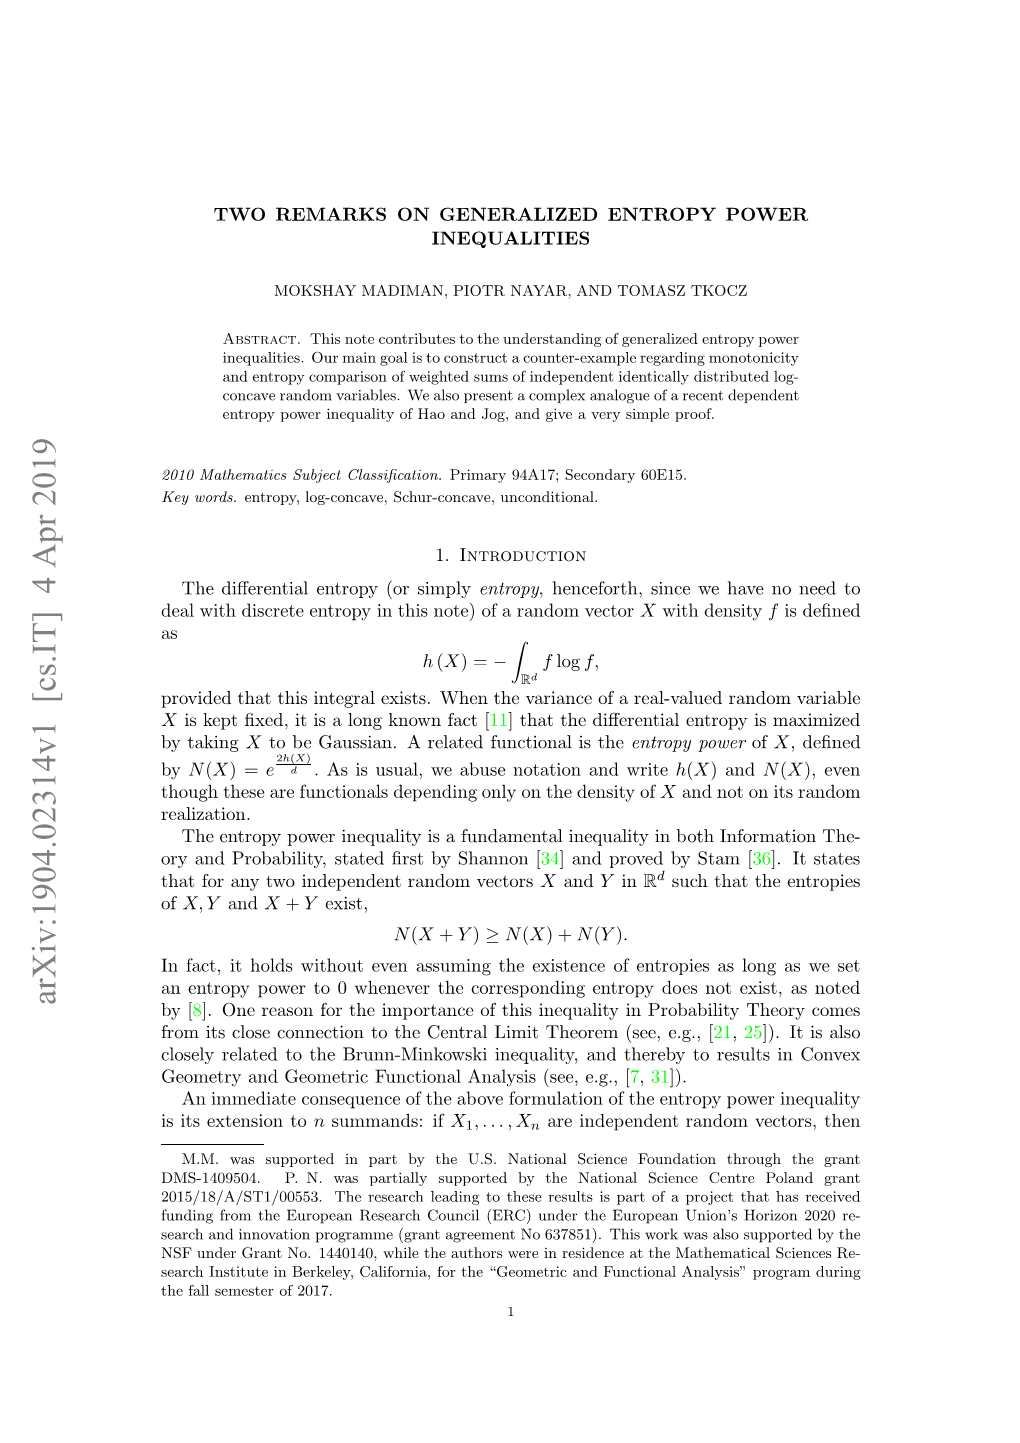 Two Remarks on Generalized Entropy Power Inequalities